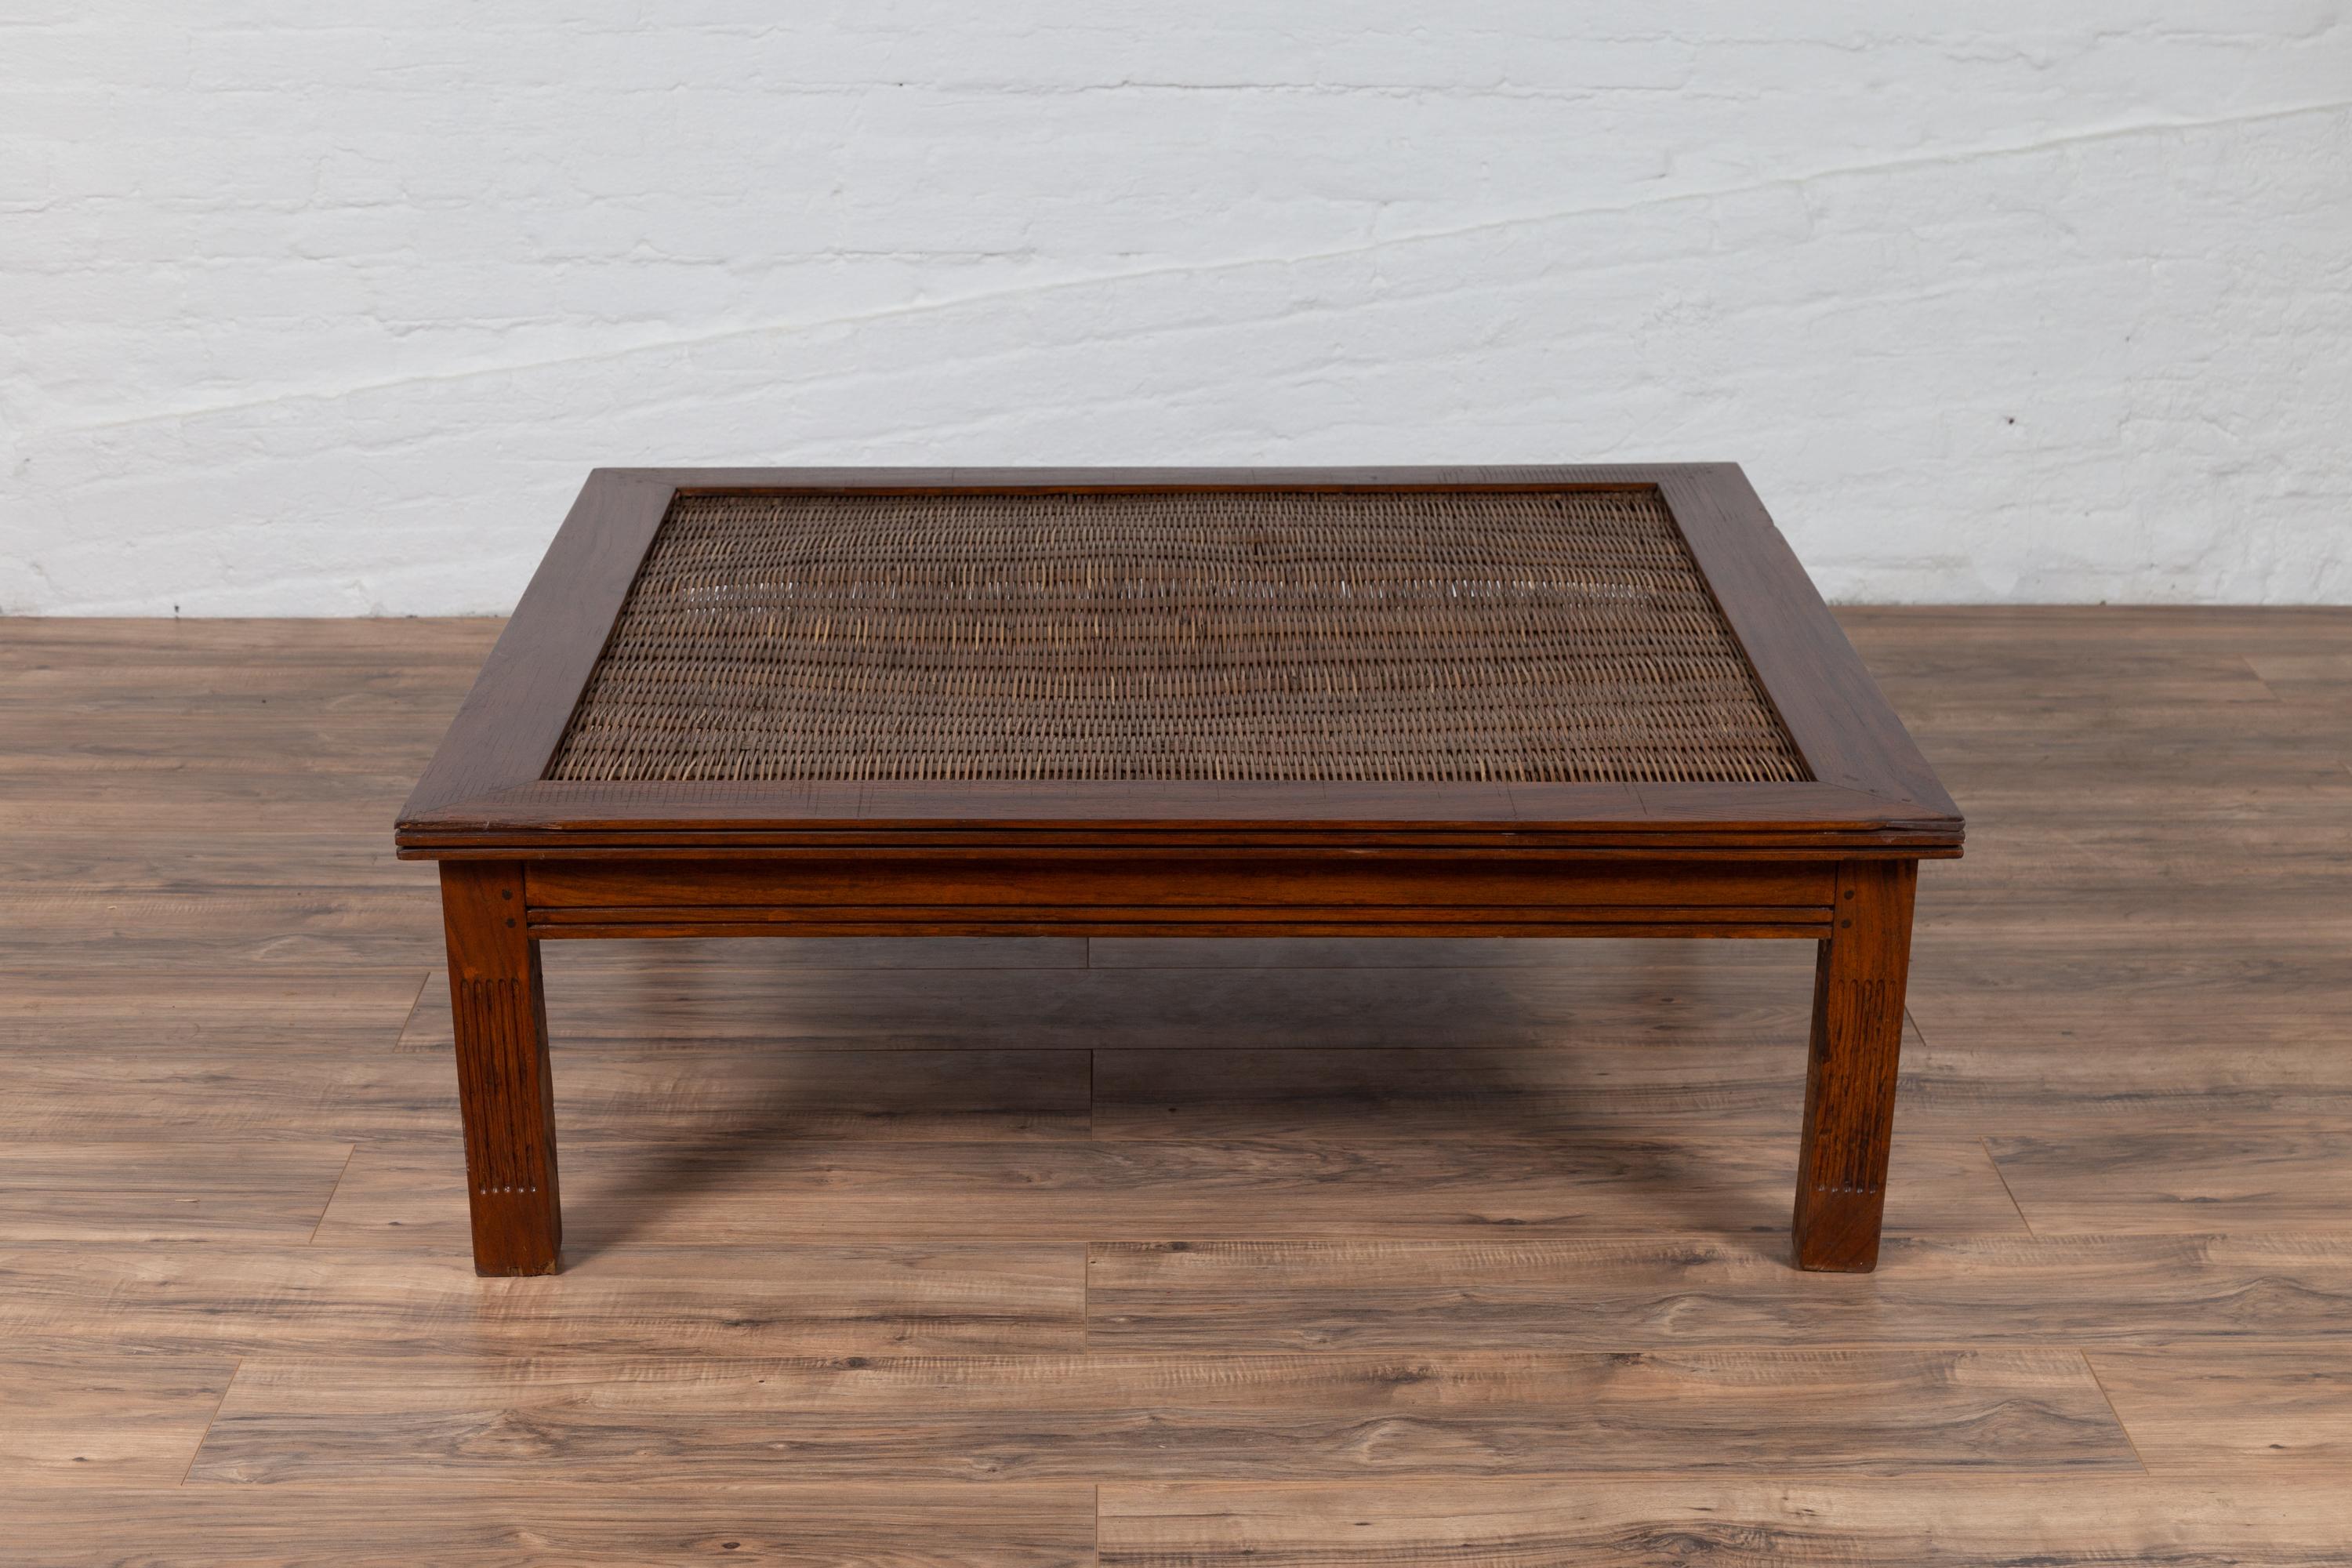 Antique Chinese Square-Shaped Elm Coffee Table with Rattan Inset and Fluted Legs 4